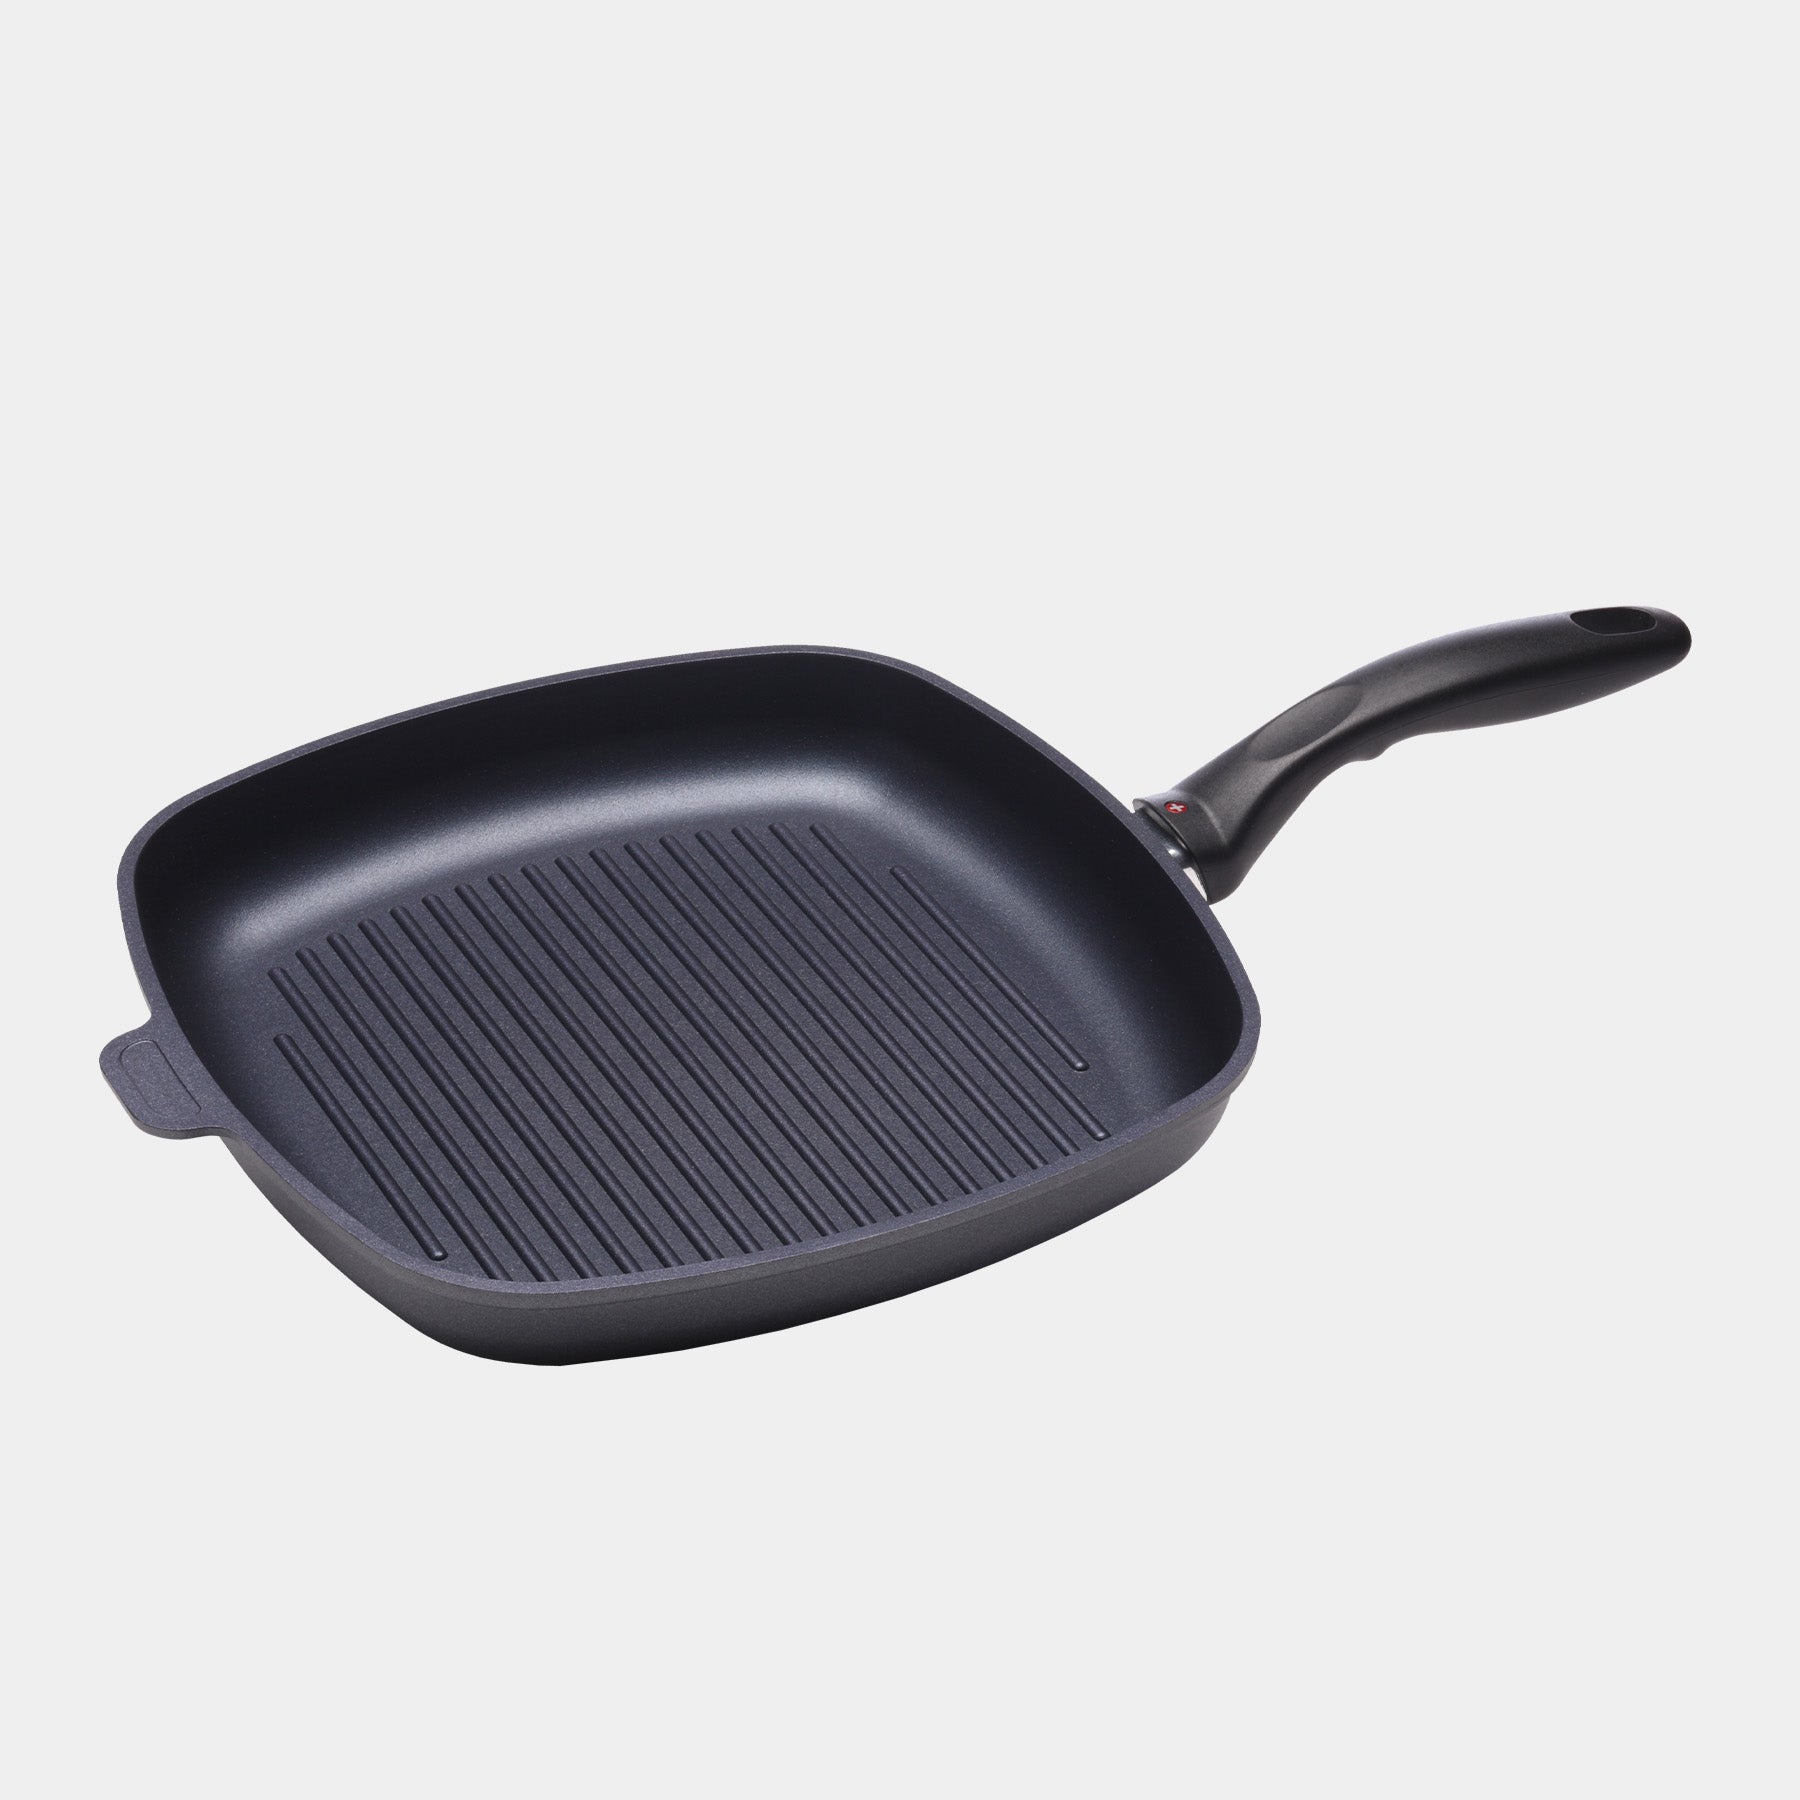 HD Nonstick 11" x 11" Square Grill Pan - Induction